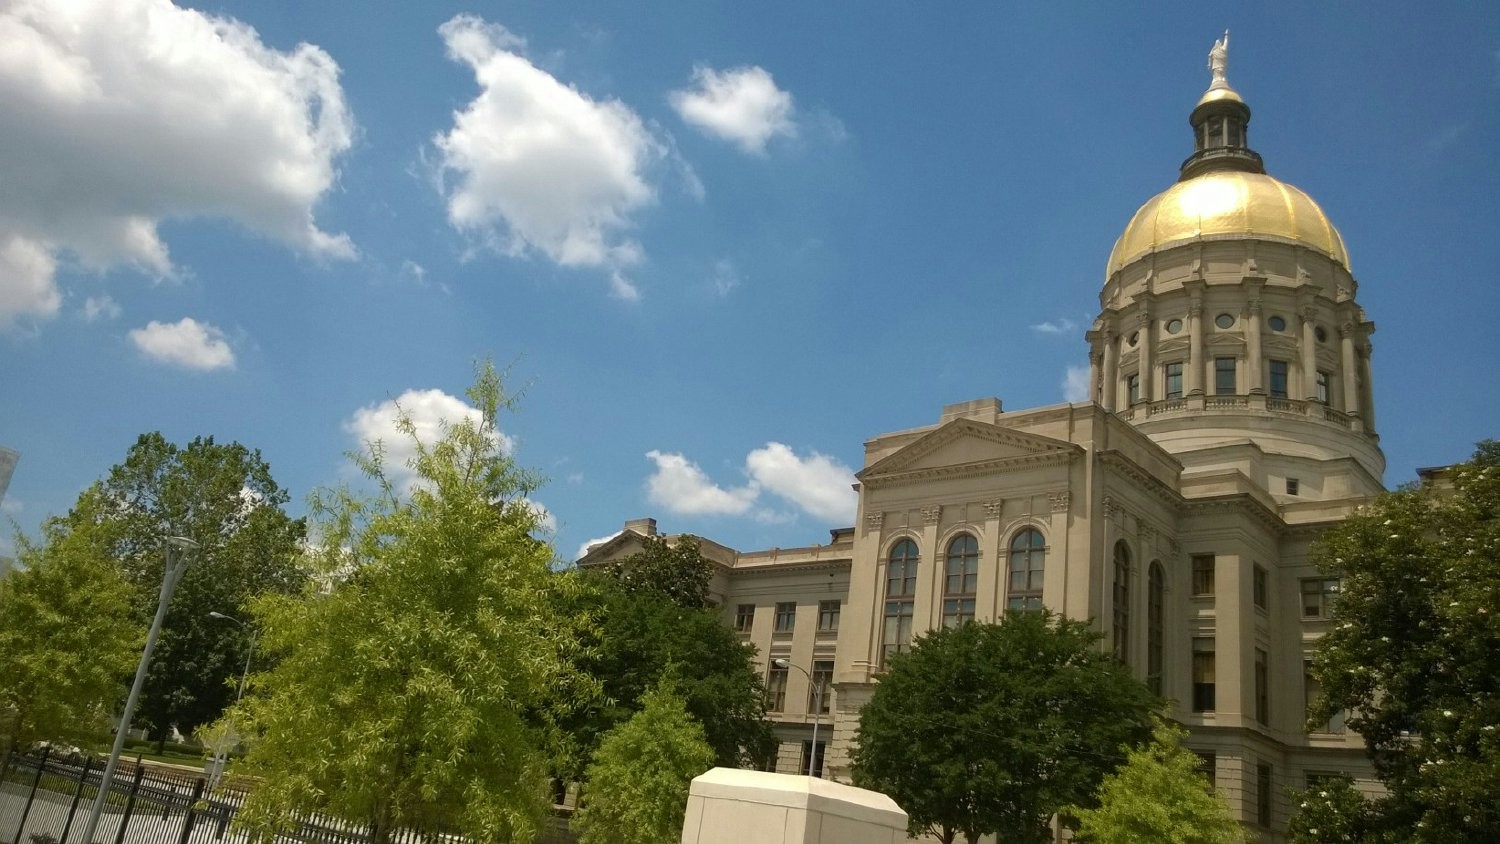 Georgia Technology Authority delivers technology services that enable the business of government in Georgia.